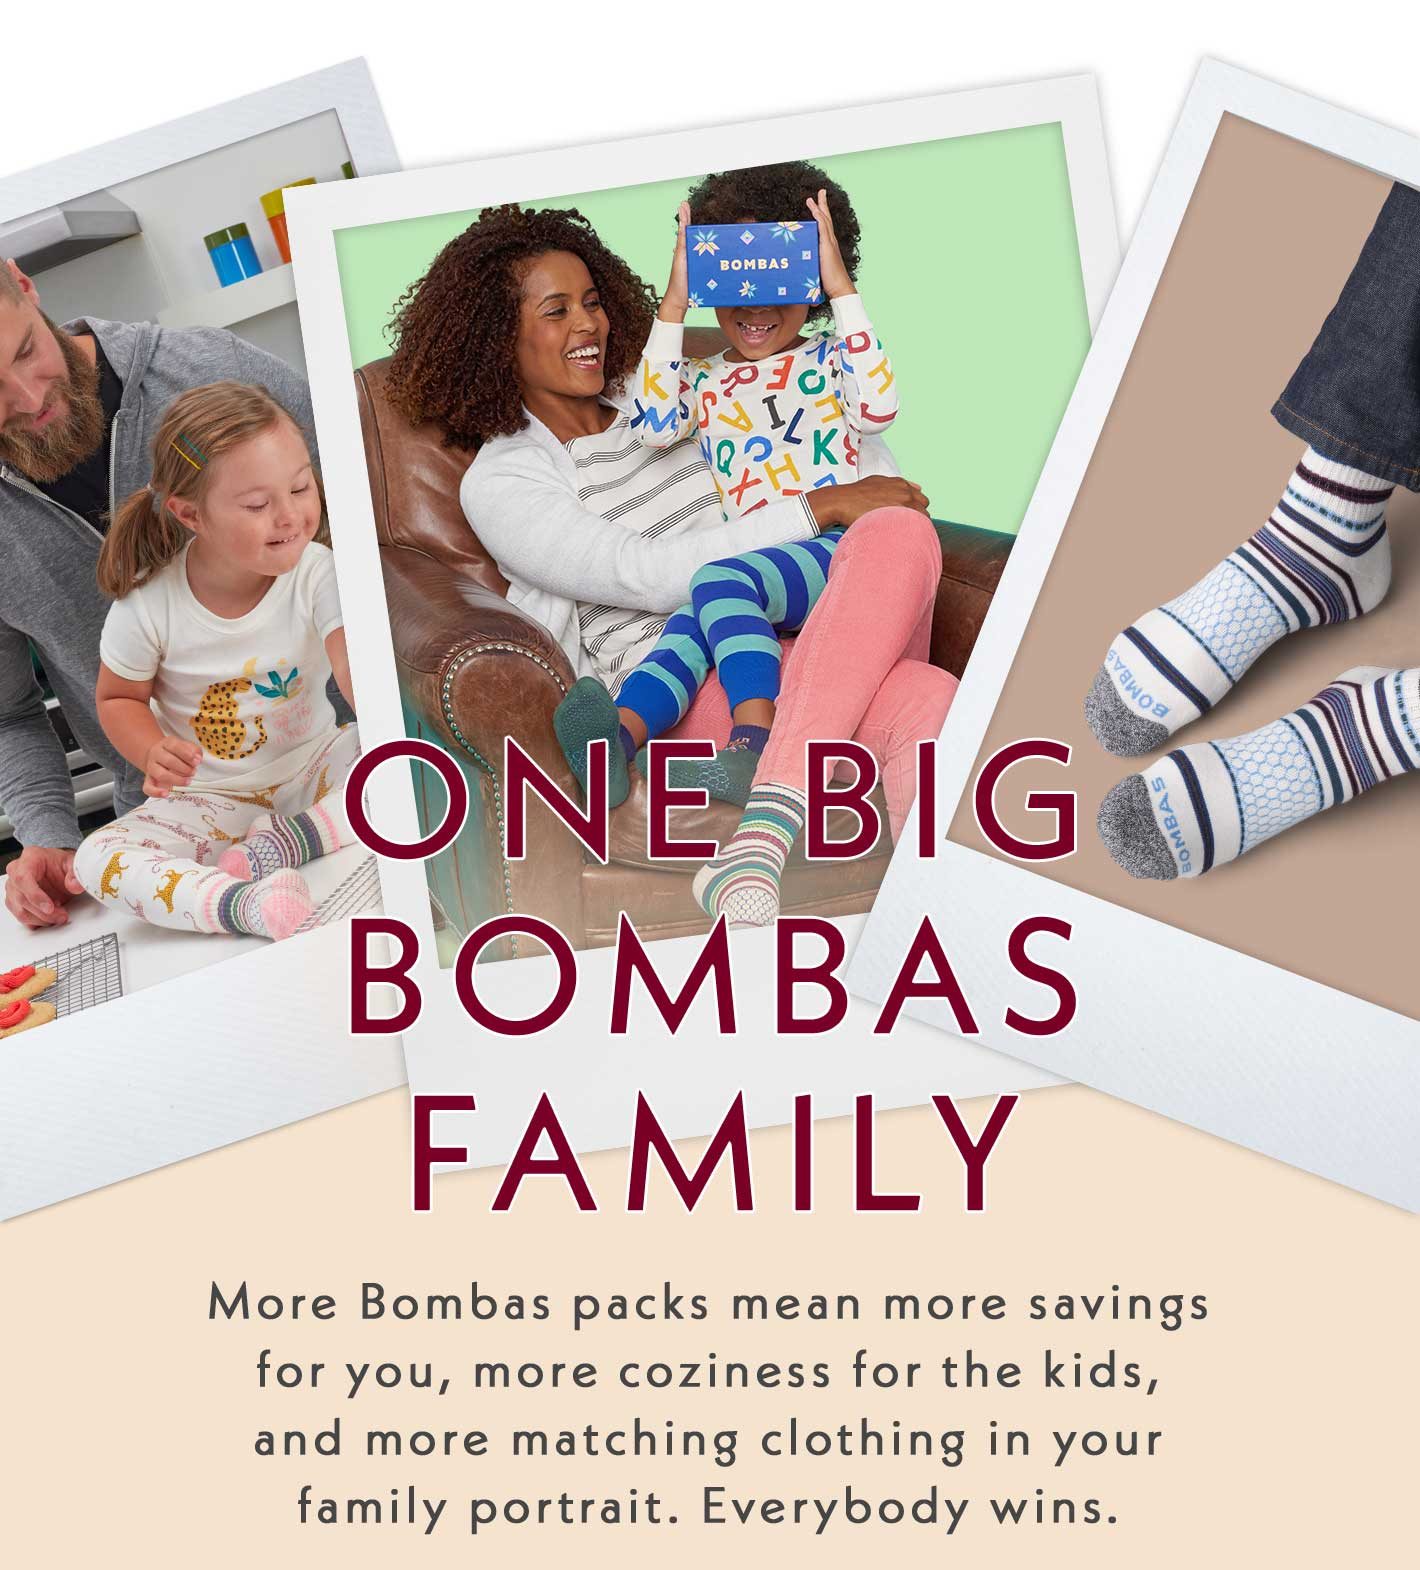 One Big Bombas Family | More Bombas packs mean more savings for you, more coziness for the kids, and more matching clothing in your family portrait. Everybody wins.